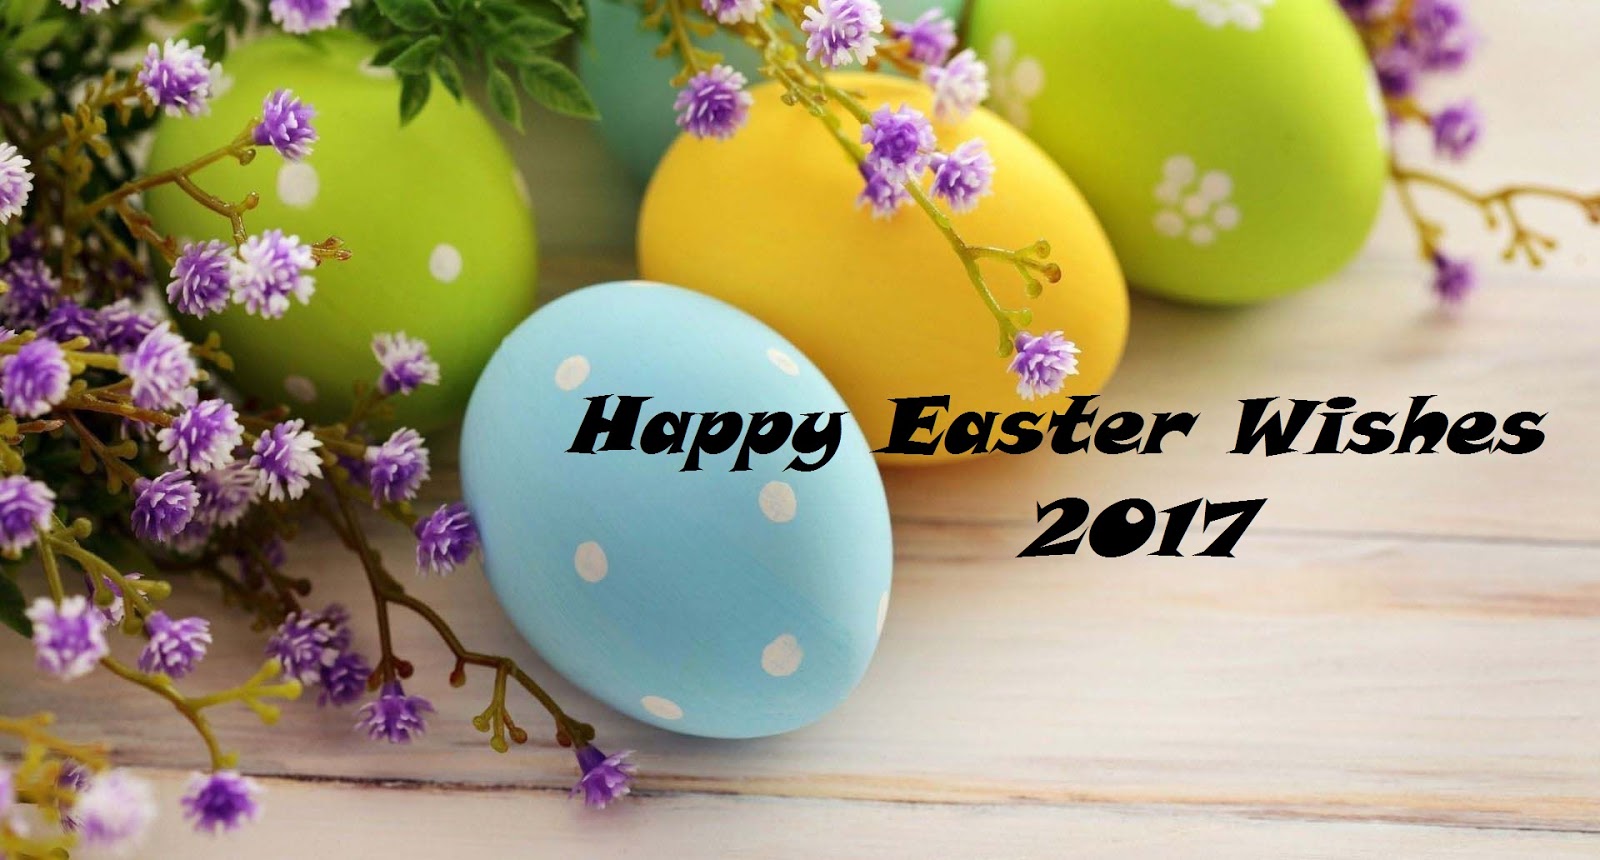 Happy Easter wishes to All, Eco House clients and friends!